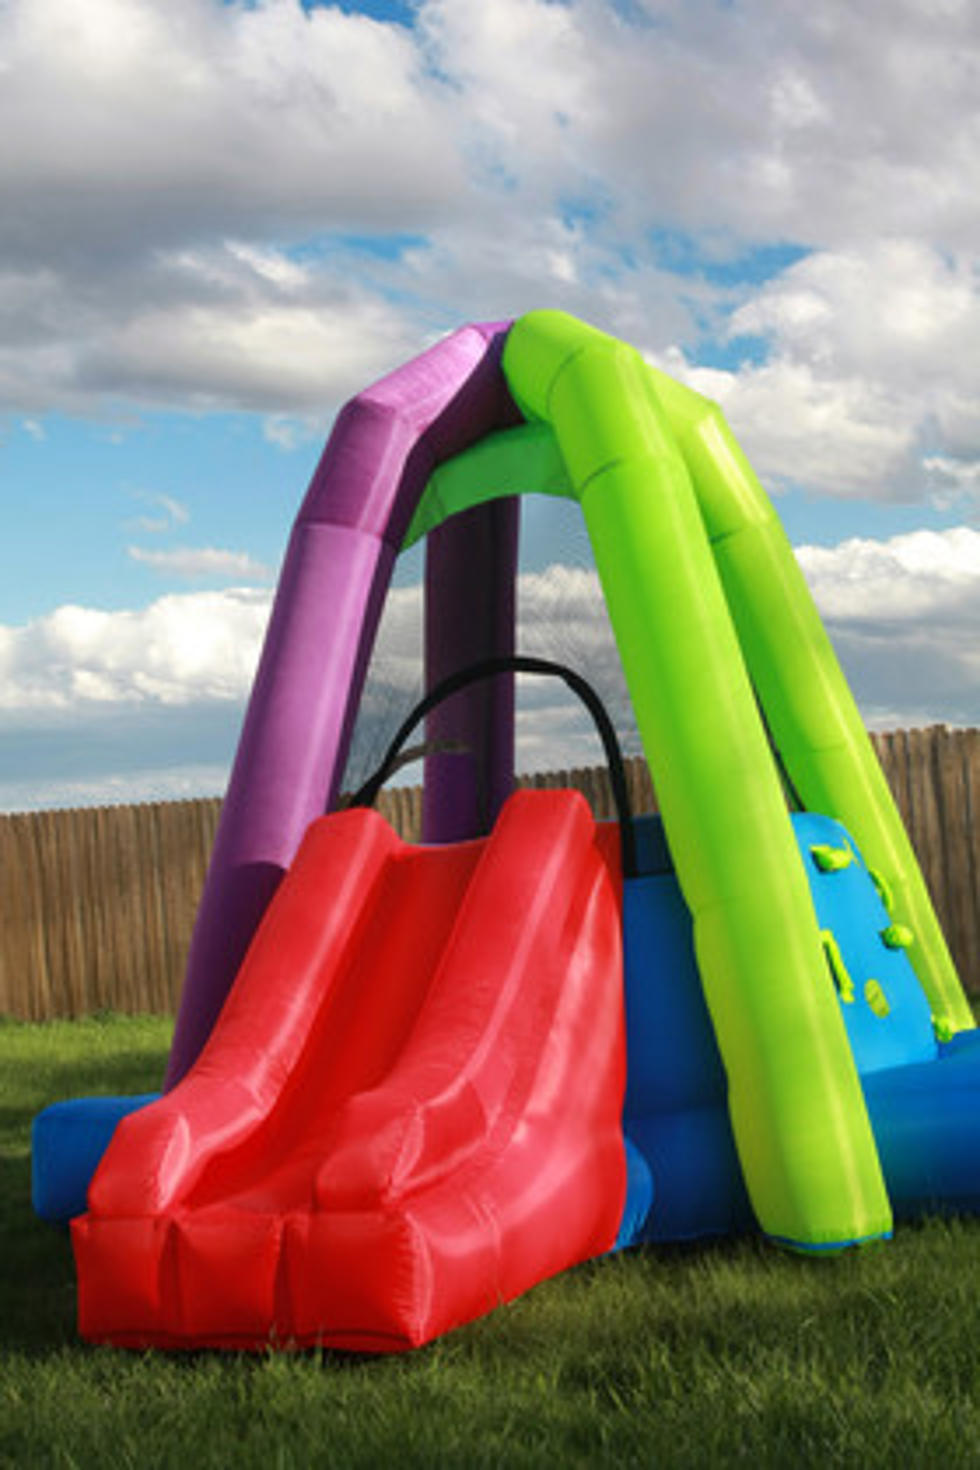 Bounce house blows away!